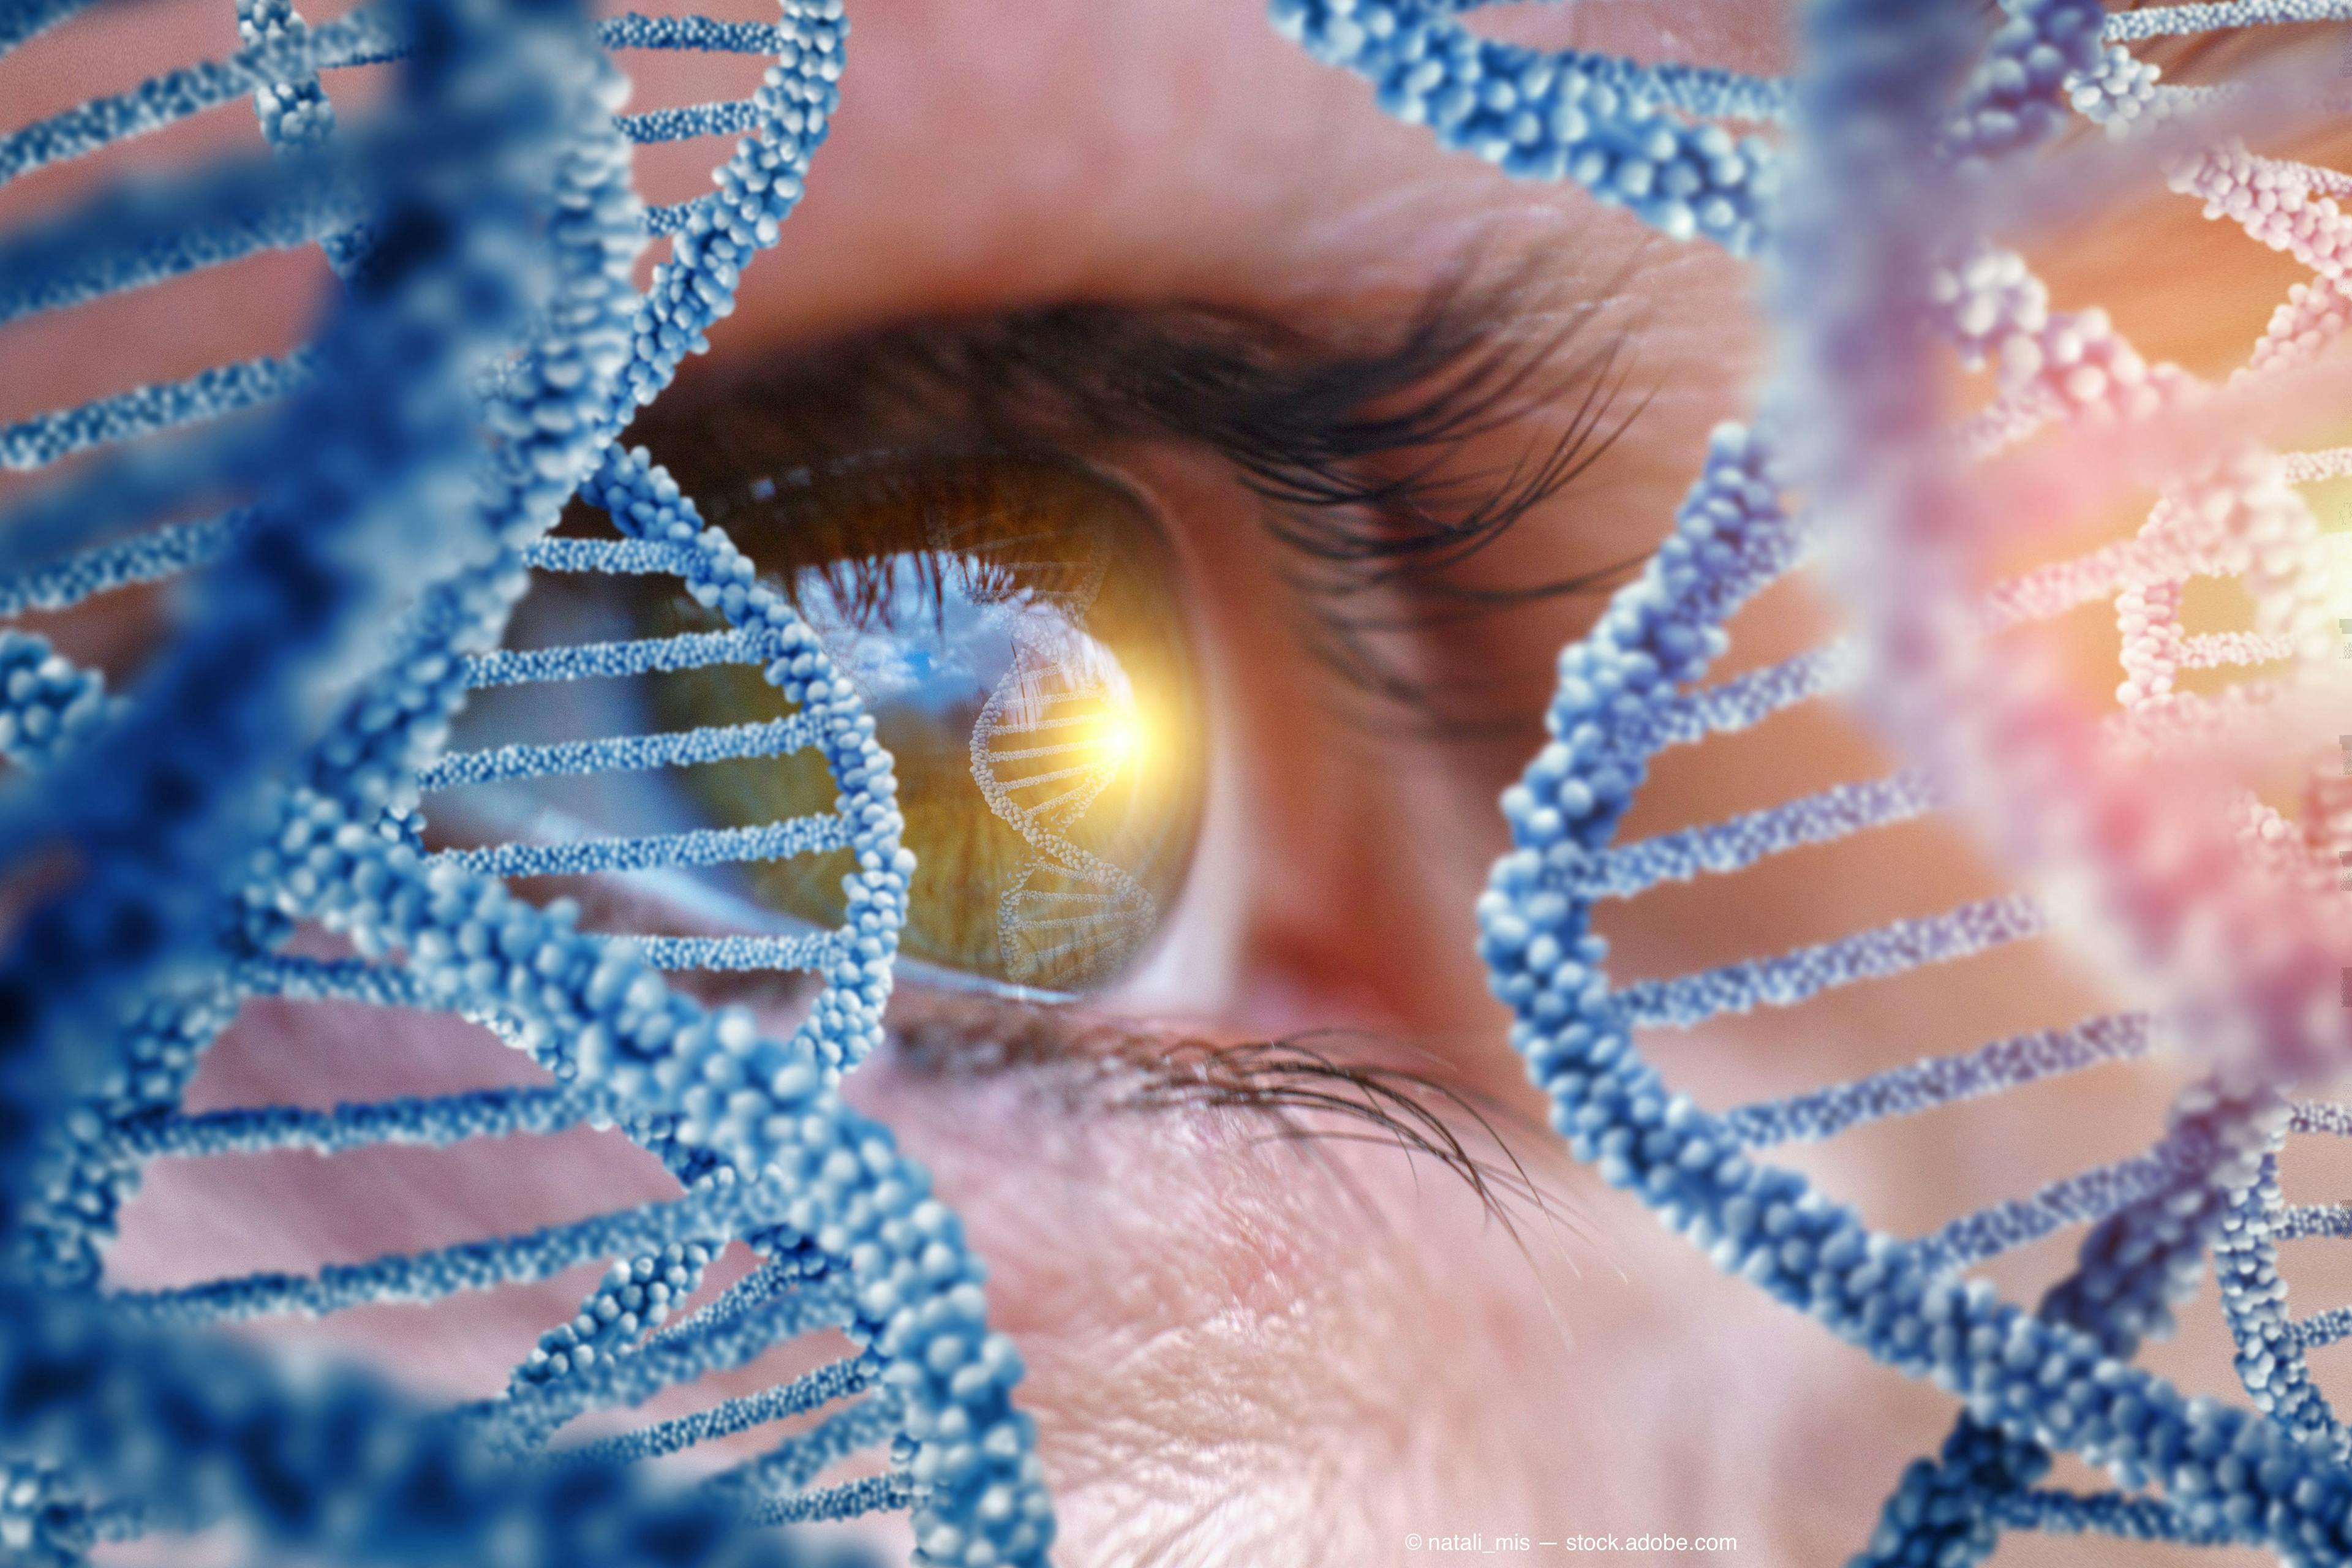 Genetic investigations have garnered a wealth of information about glaucoma, the third most inherited human disease, which has pinpointed specific genes involved in early-onset familial disease with autosomal dominant or recessive inheritance as well as genetic risk factors for common glaucoma types with complex inheritance patterns.